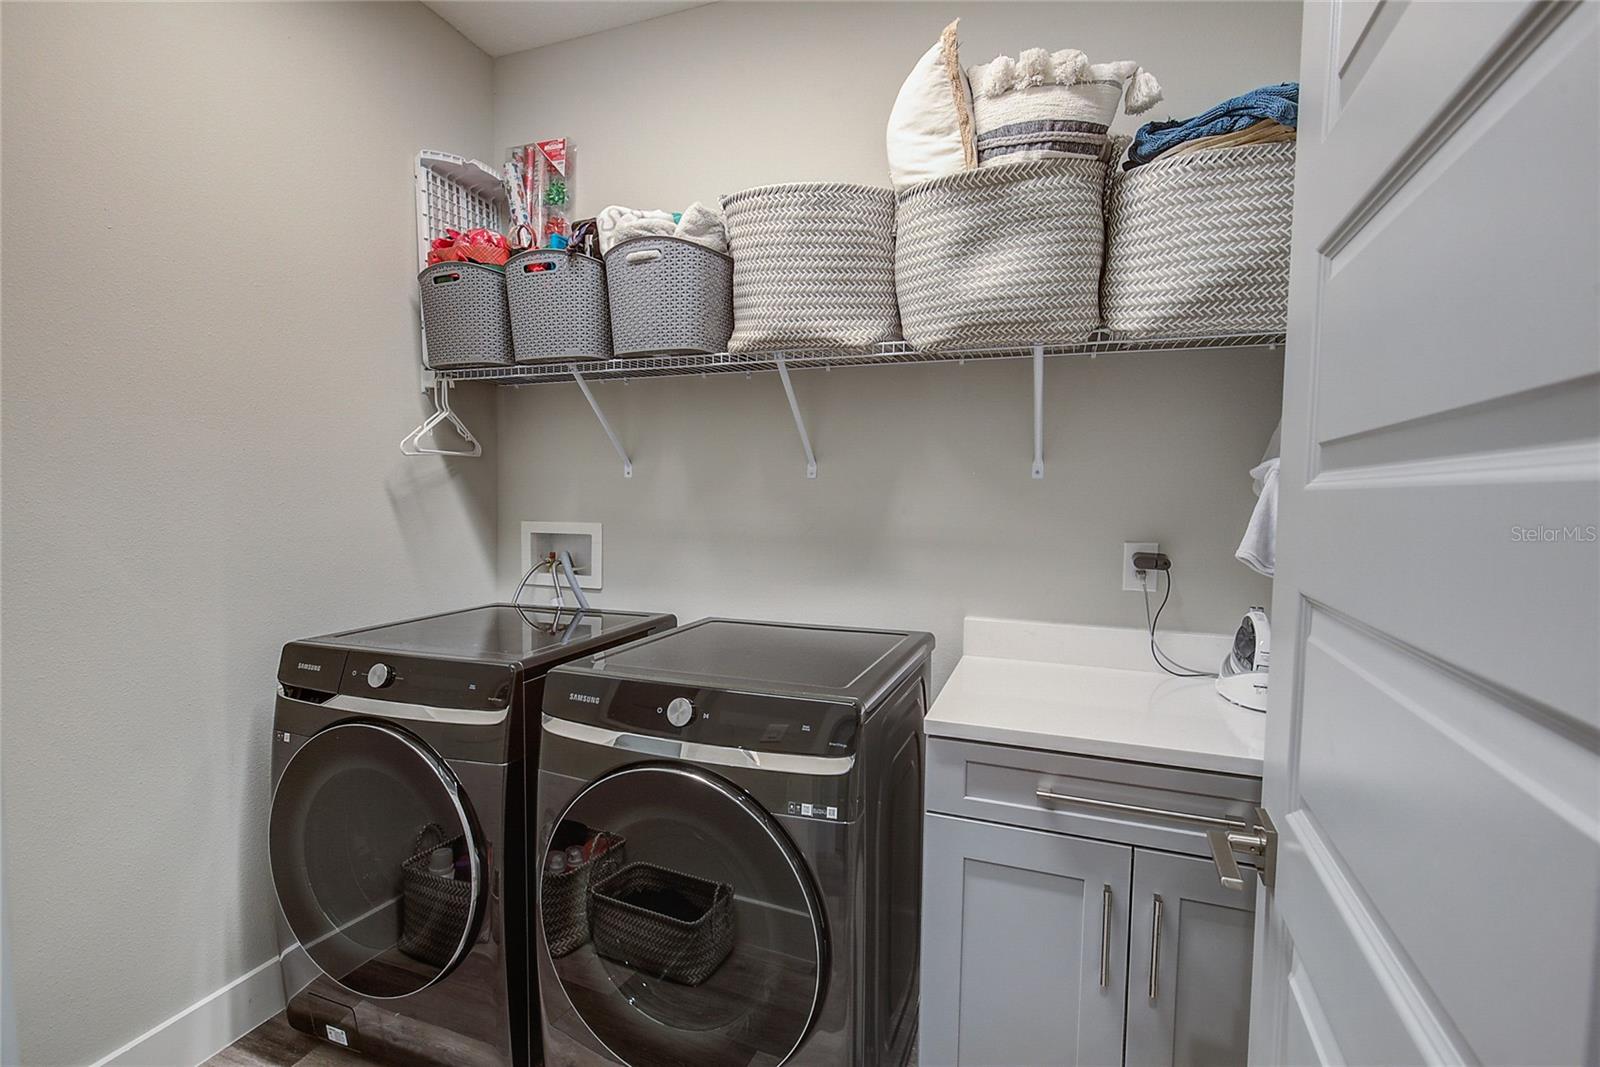 ROOMY LAUNDRY ROOM WITH CUSTOM CABINETRY